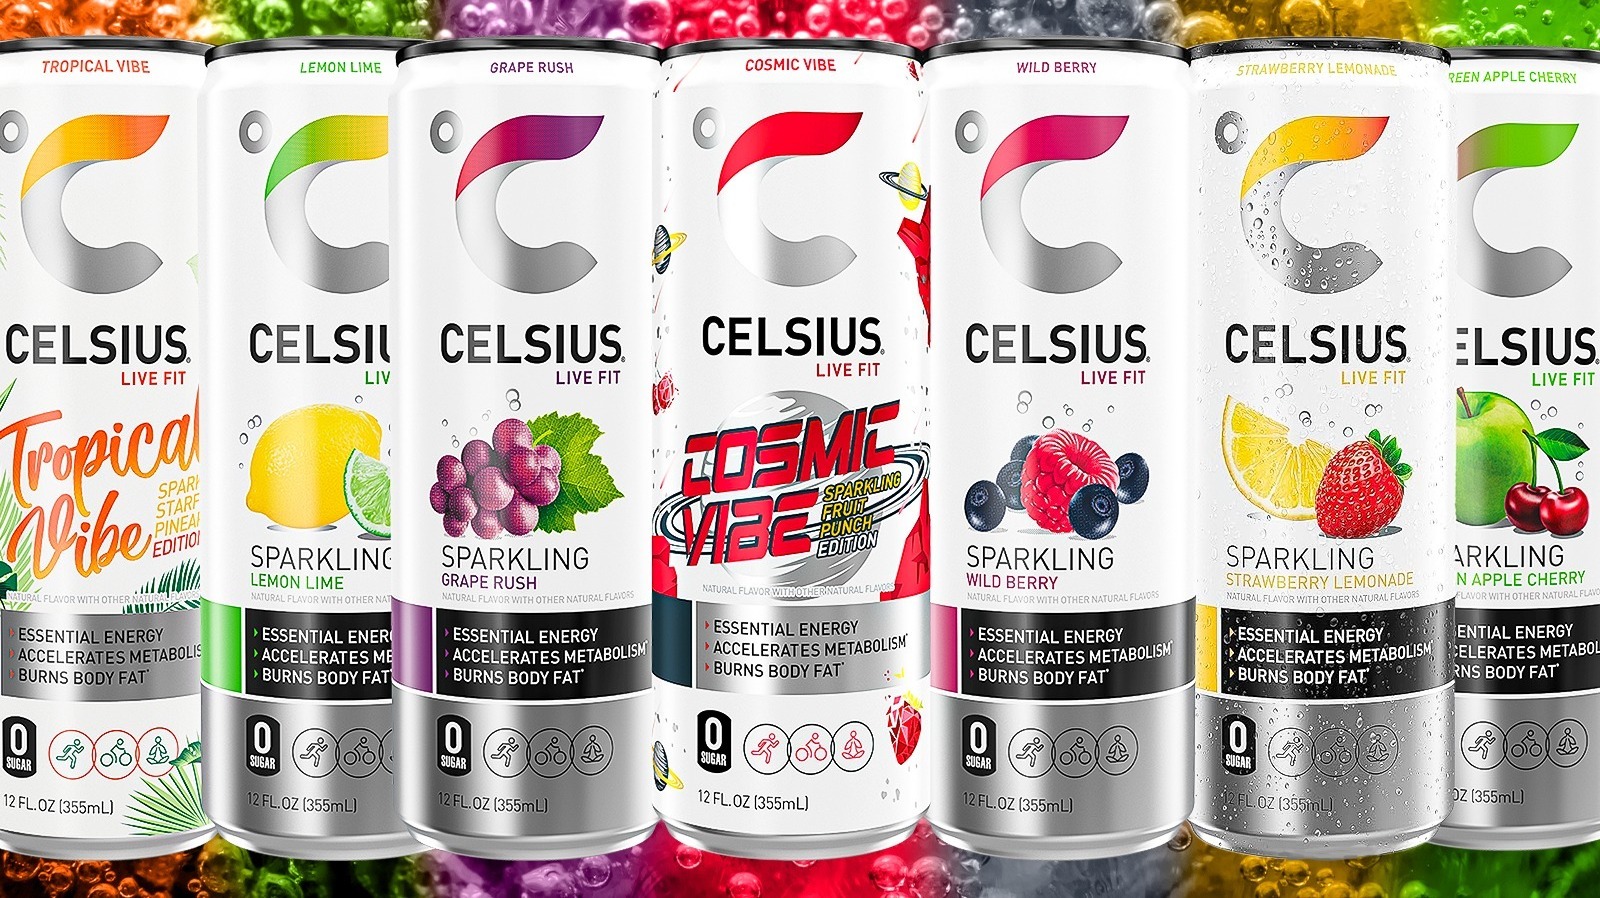 We Ranked Every Celsius Flavor From Worst To Best